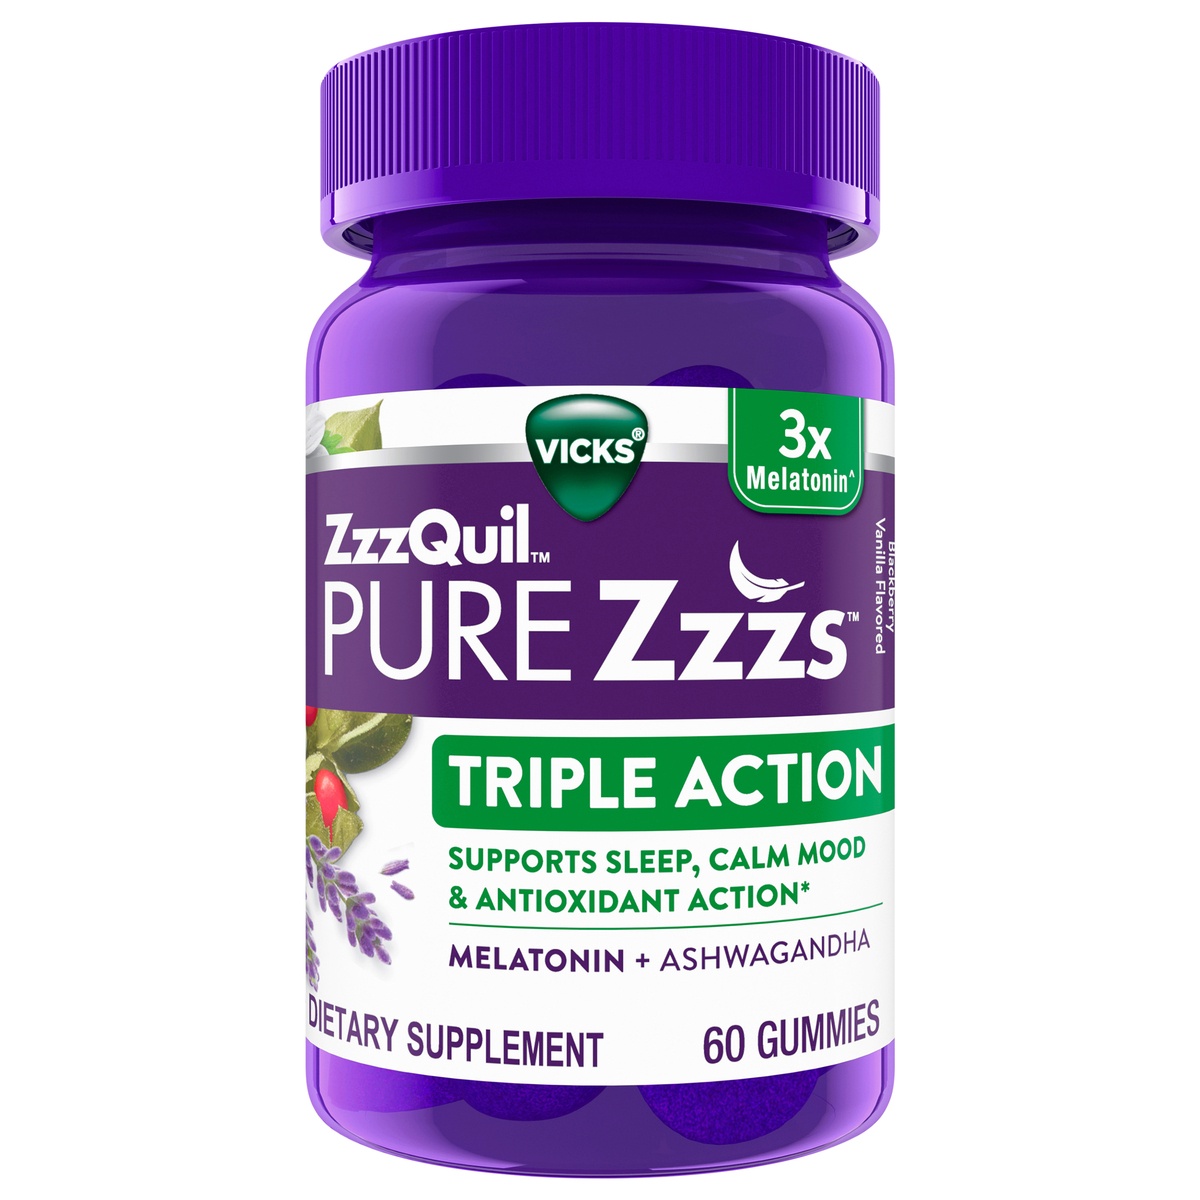 slide 4 of 4, ZzzQuil PURE Zzzs Triple Action Gummy Melatonin Sleep-Aid with Ashwagandha, 6mg per Serving by ZzzQuil, 60 Gummies, 1 ct